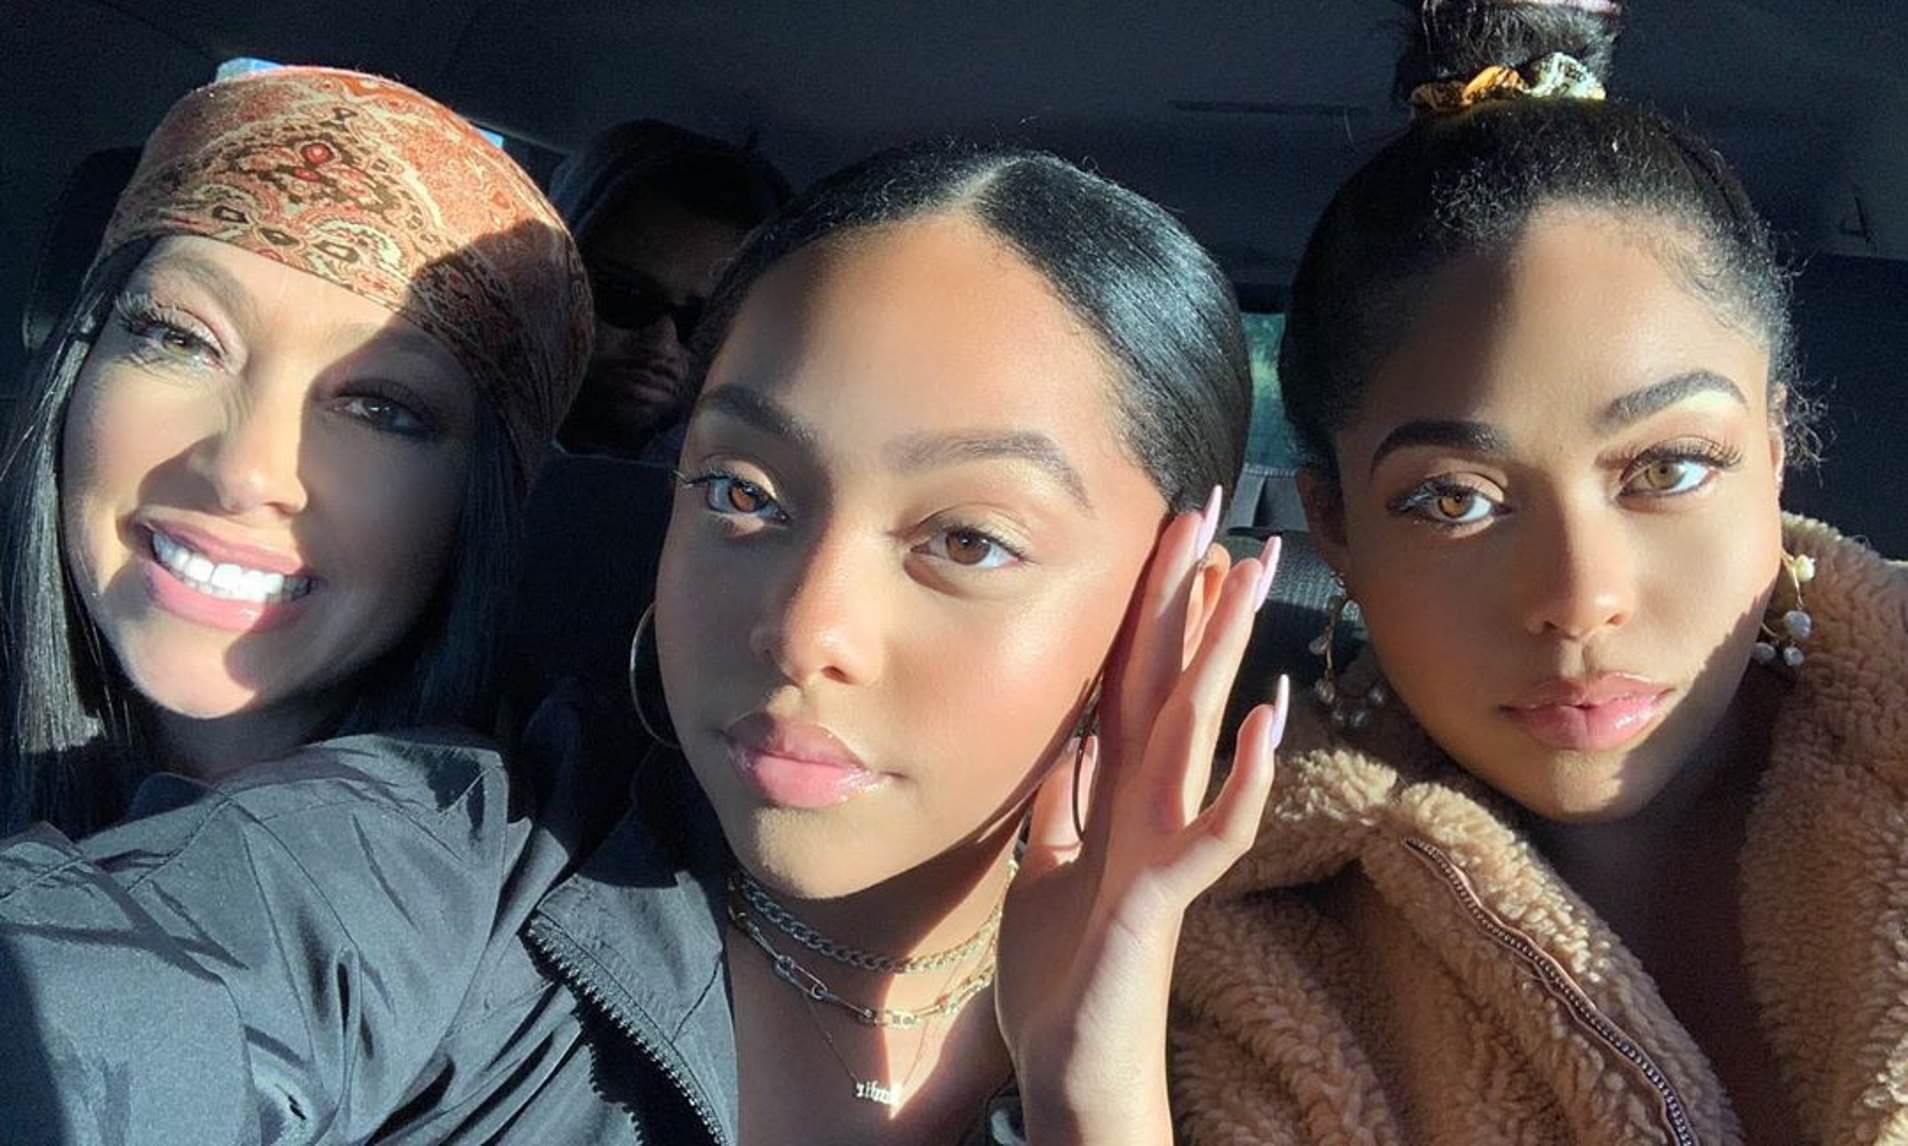 Jordyn Woods Surprises Fans With A New YouTube Video: 'Mom Vs. Sister' - Check It Out Here